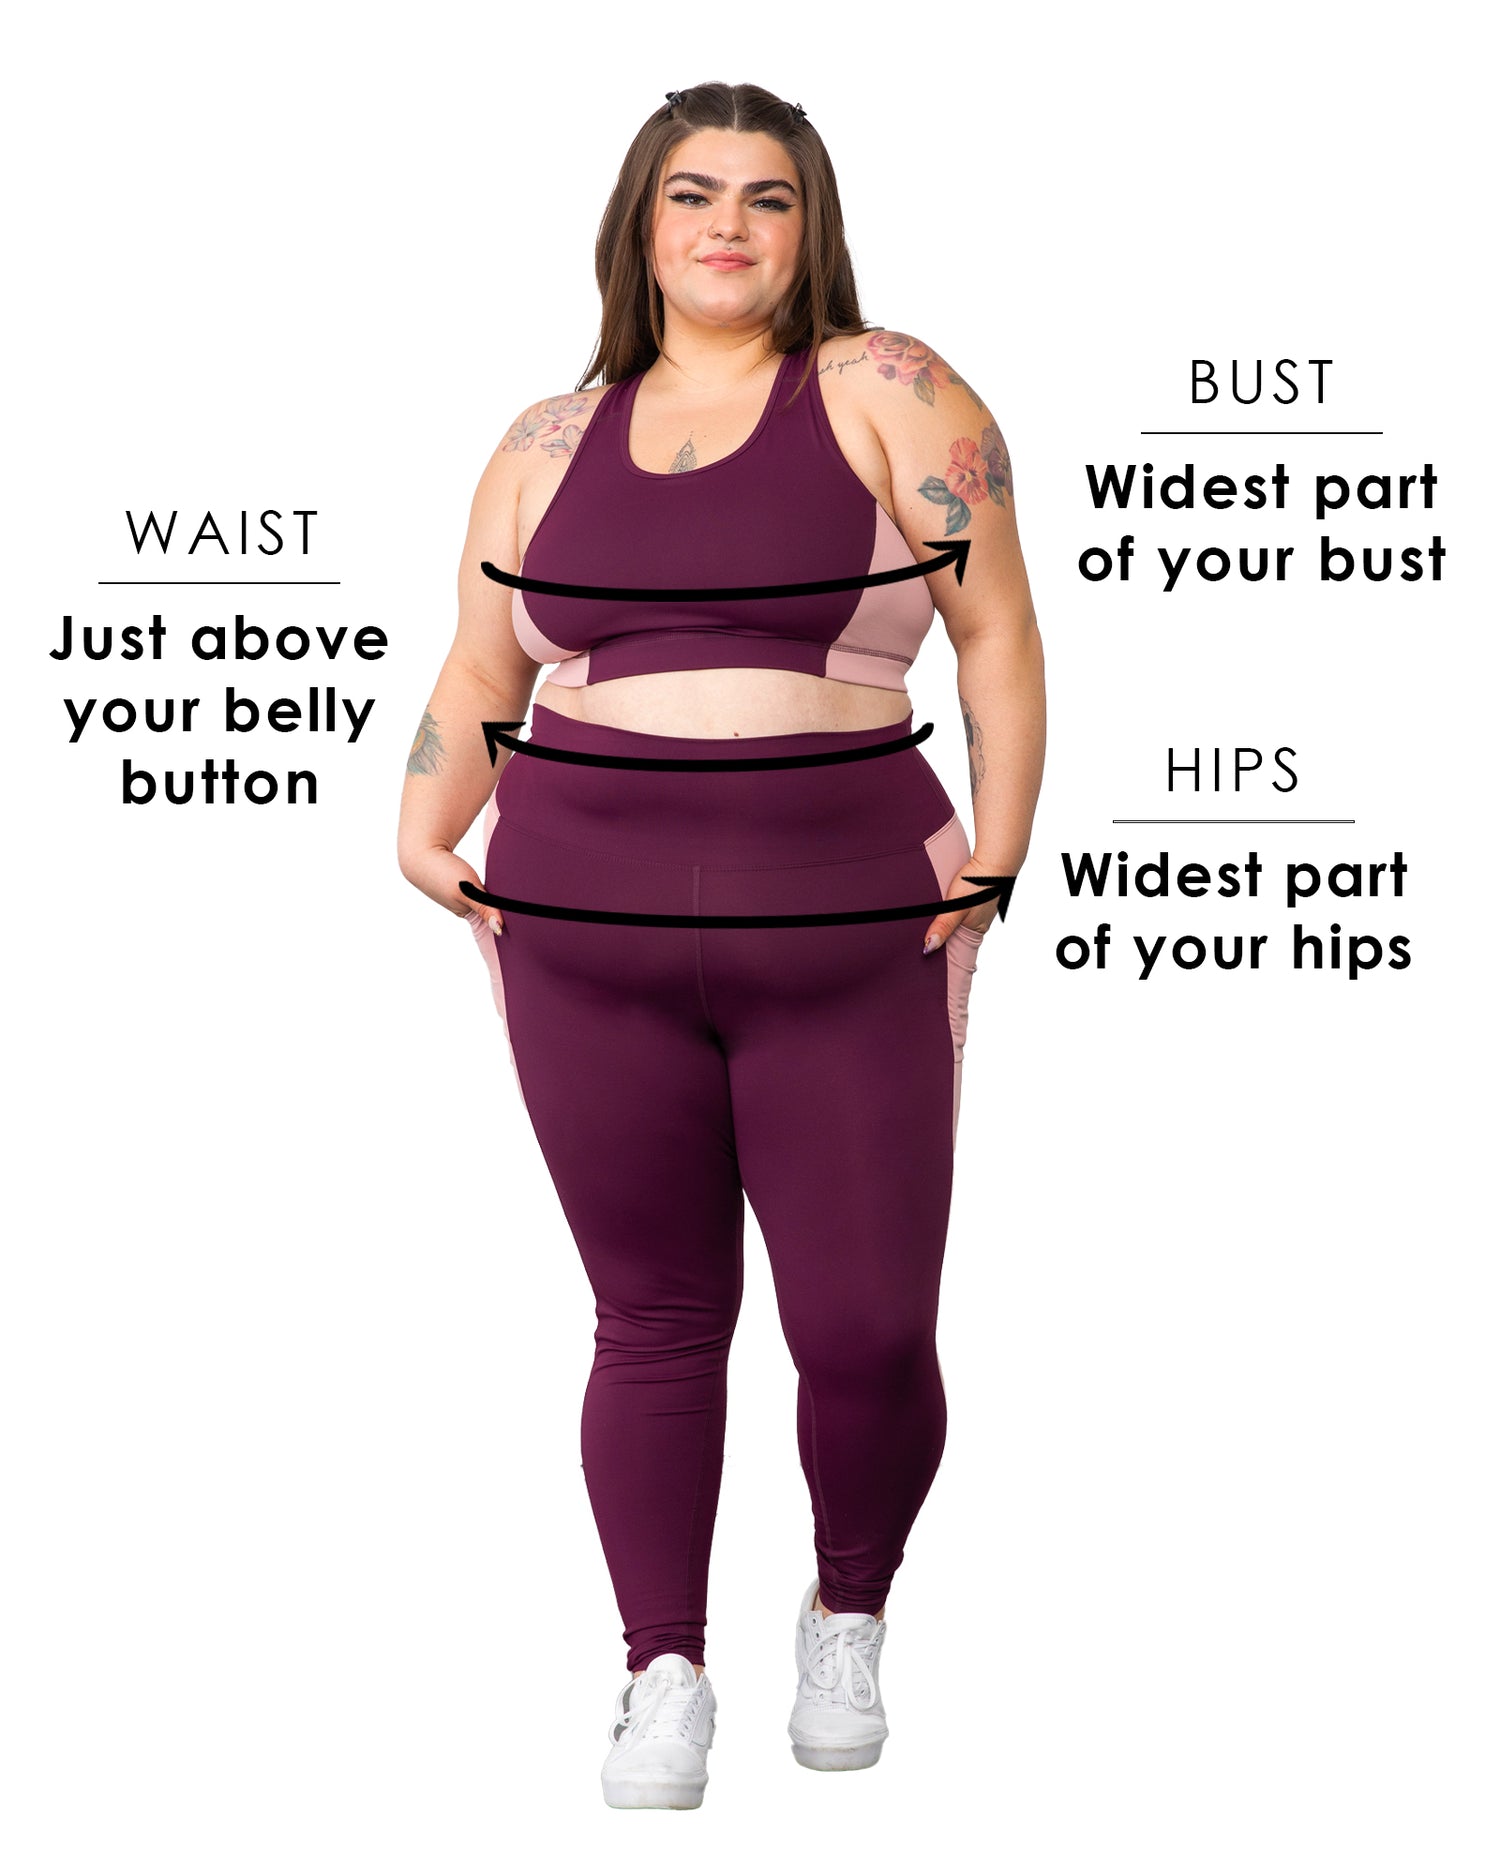 Plus size model how to get measurements for plus size womens activewear